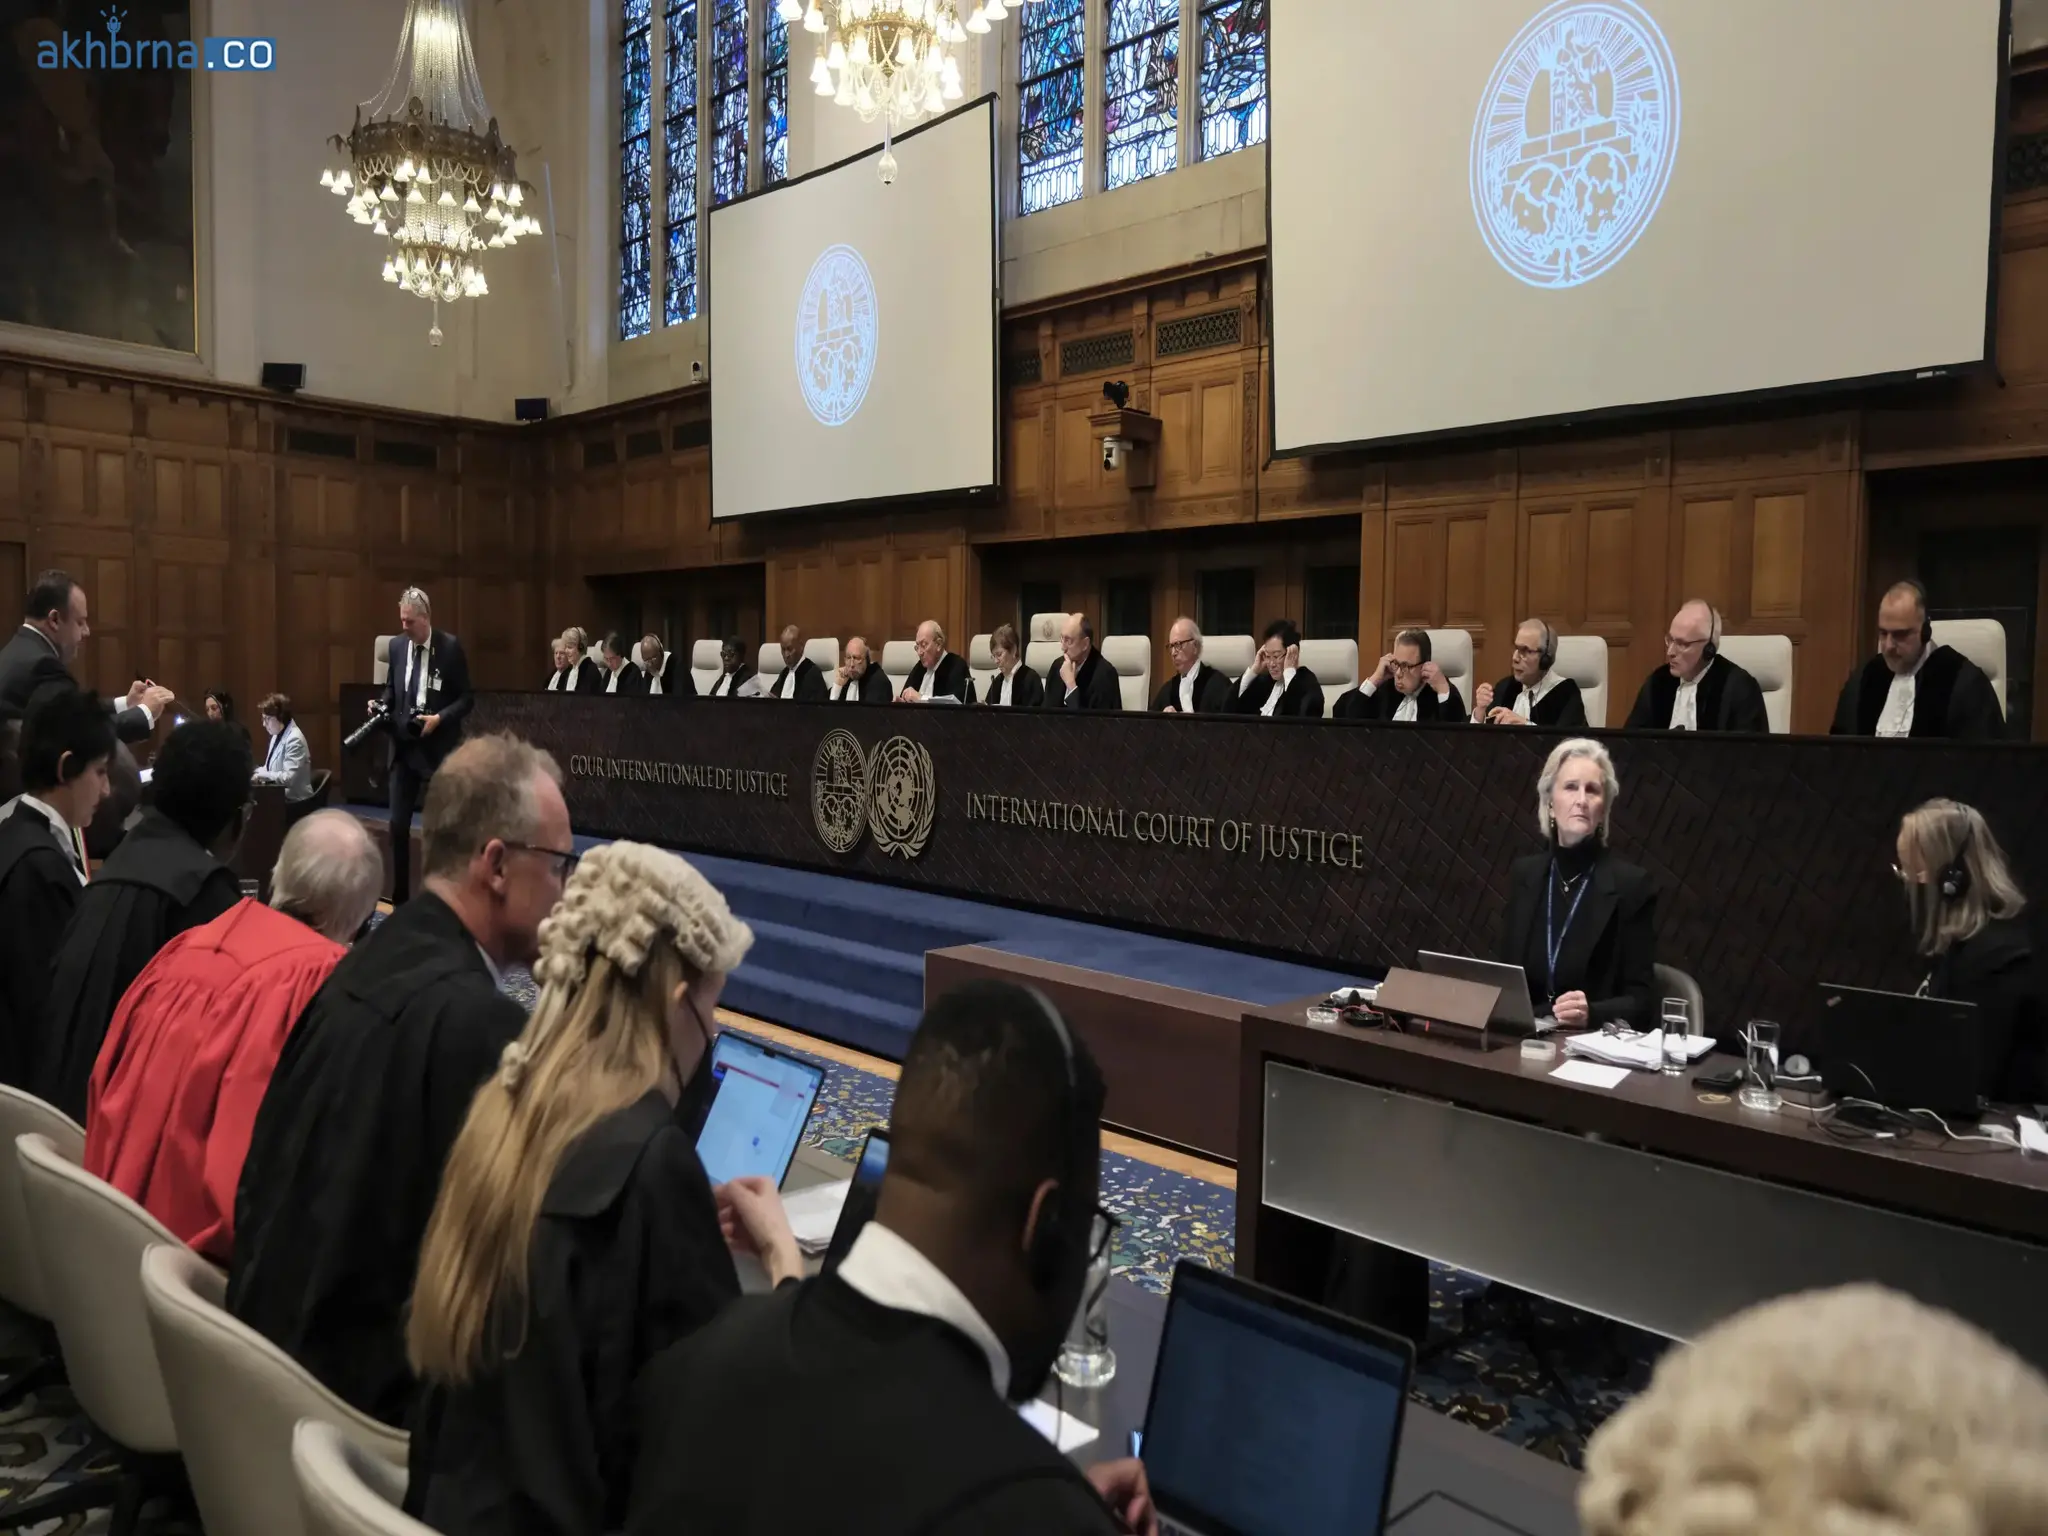 The International Court of Justice imposes interim measures on Israel